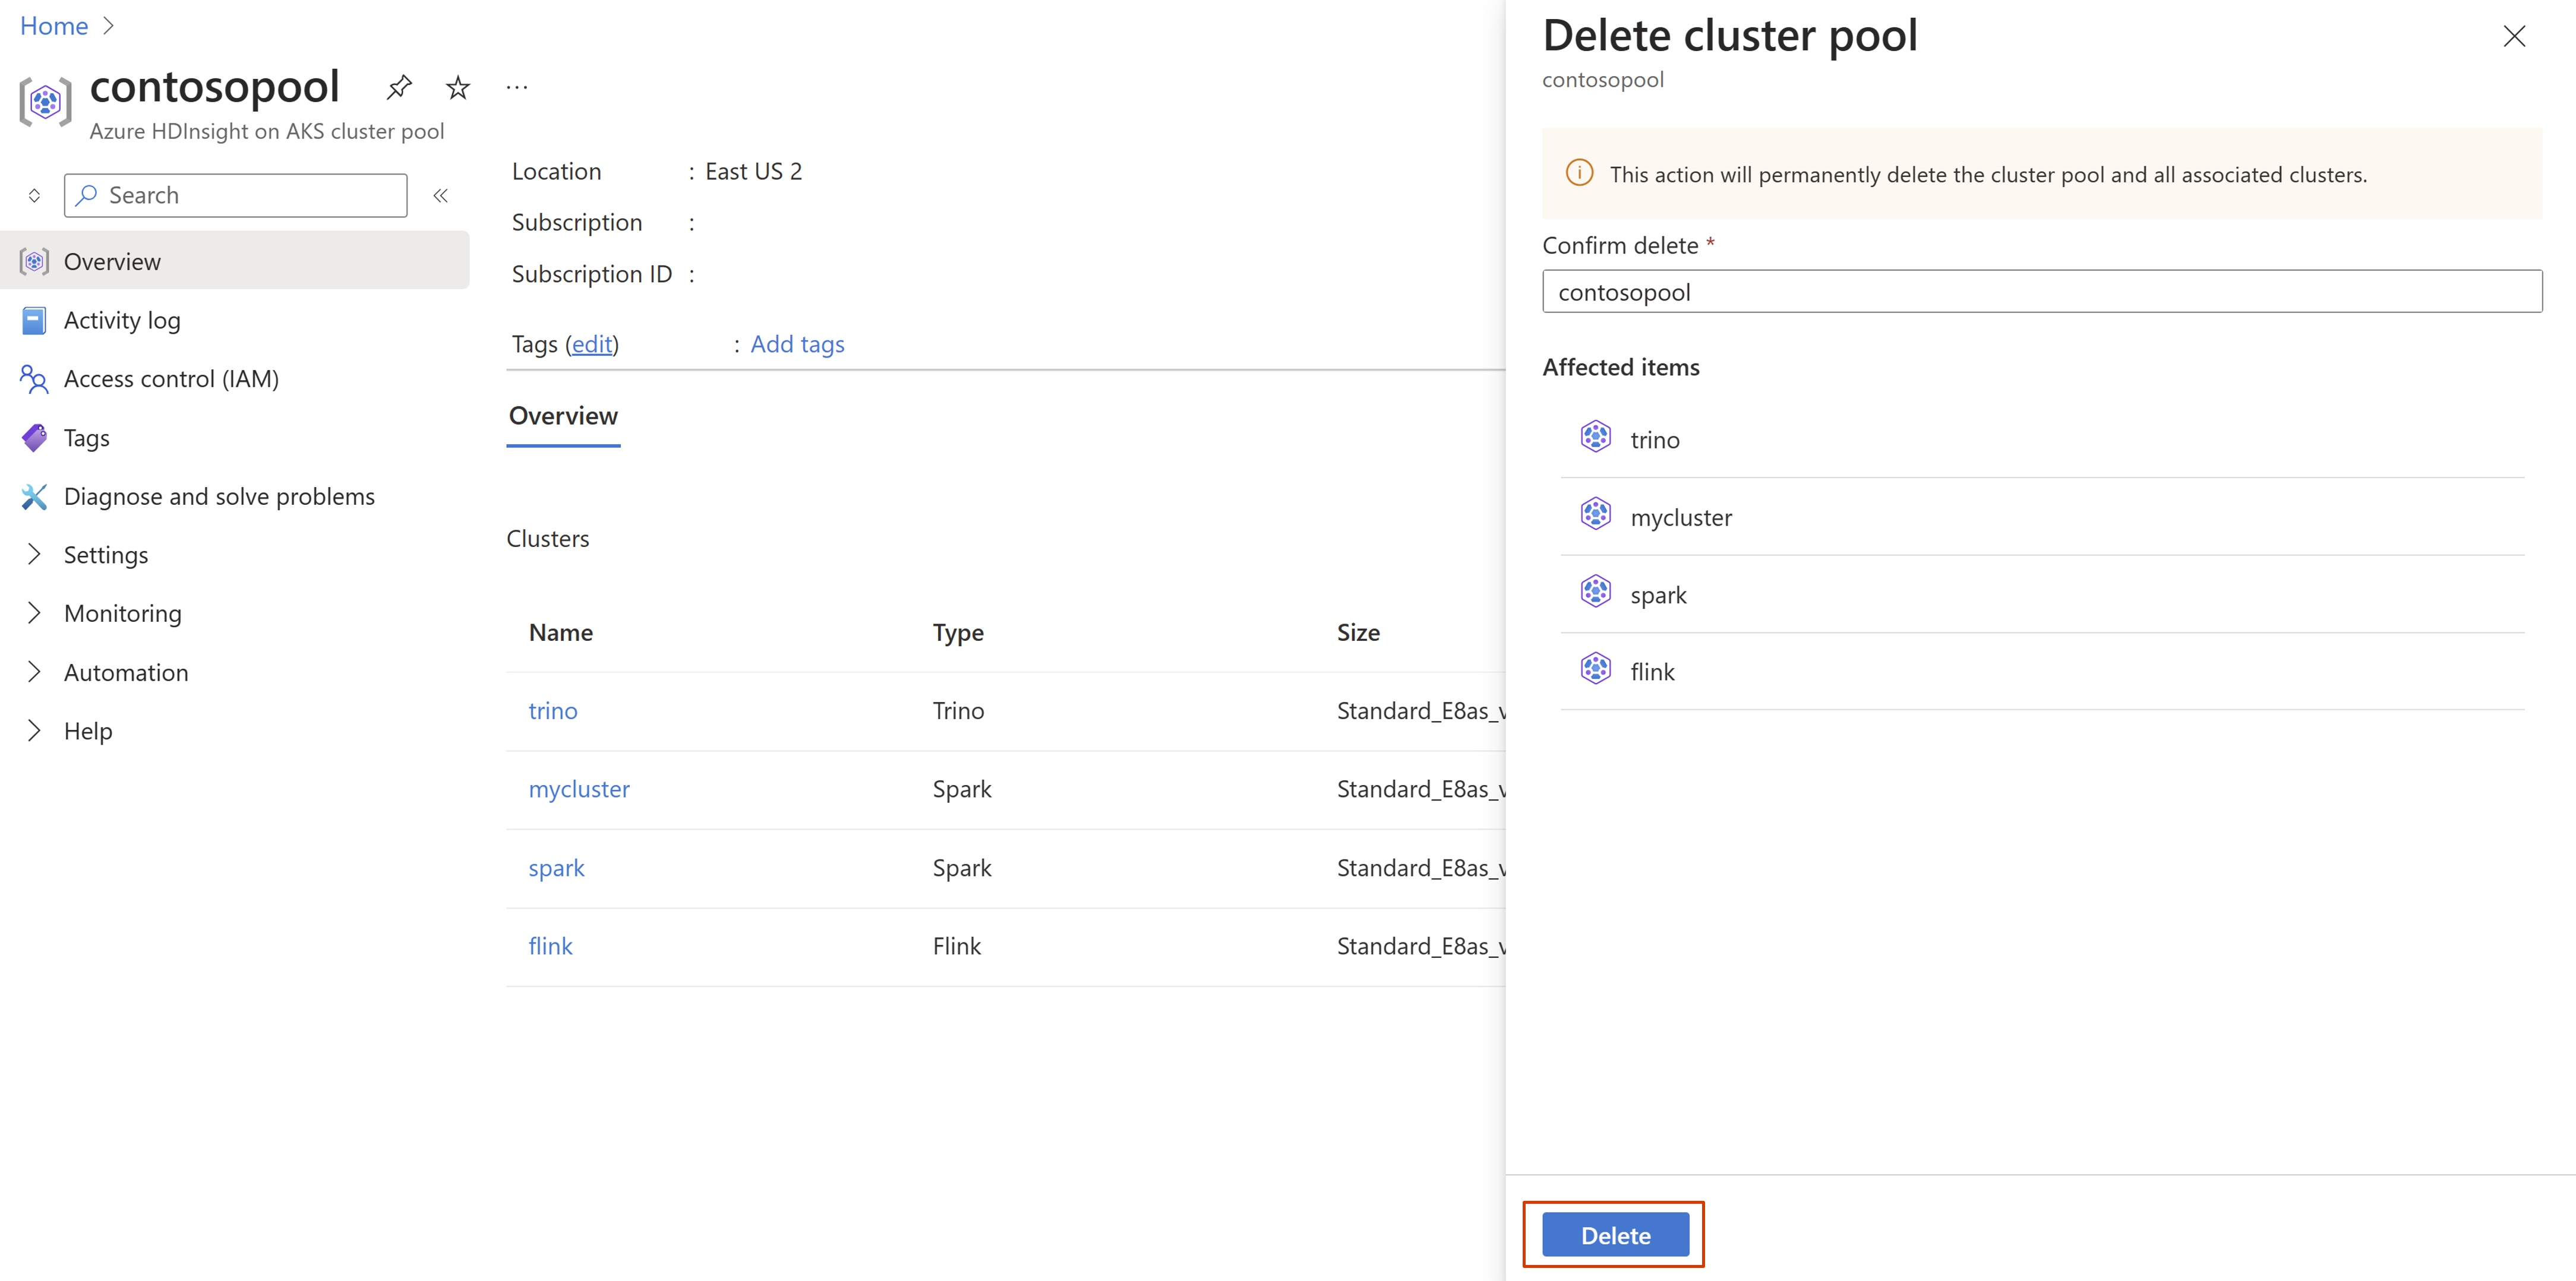 Screenshot showing how to delete cluster pool, and updating your cluster pool name once you click delete.